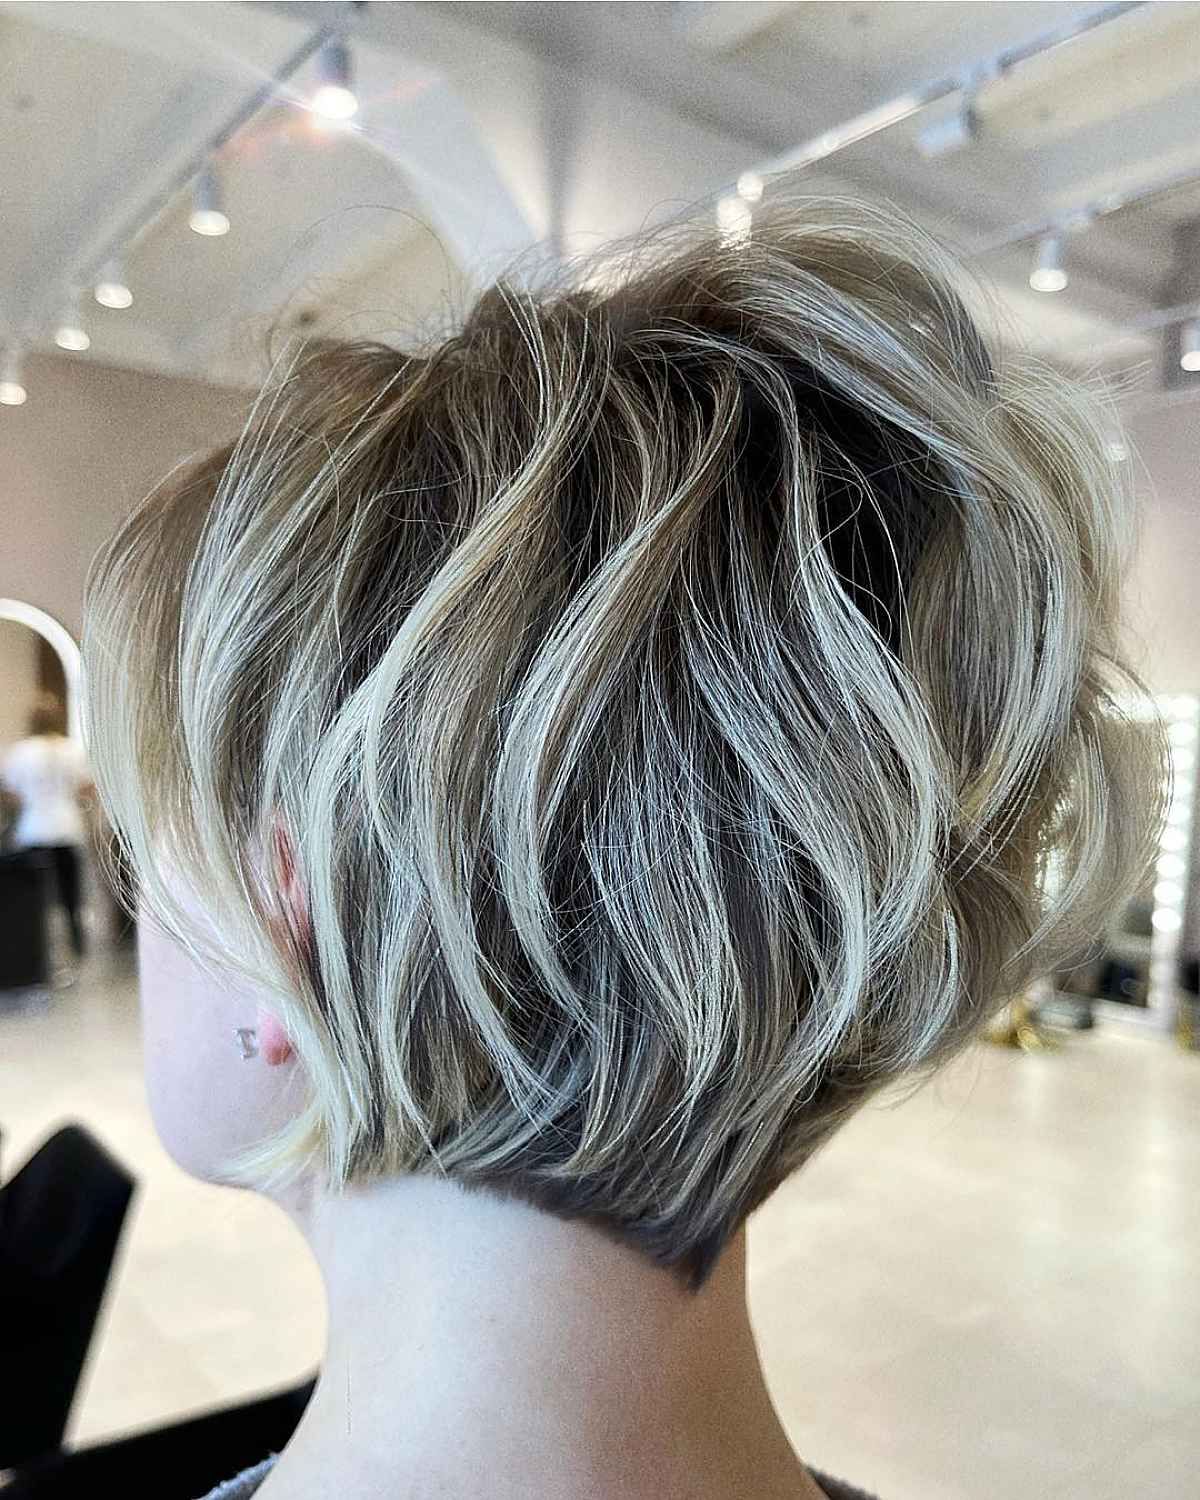 33 Most Volumizing Pixie Cuts For Thin Hair With Voluminous Pixie Hairstyles With Wavy Texture (View 7 of 25)